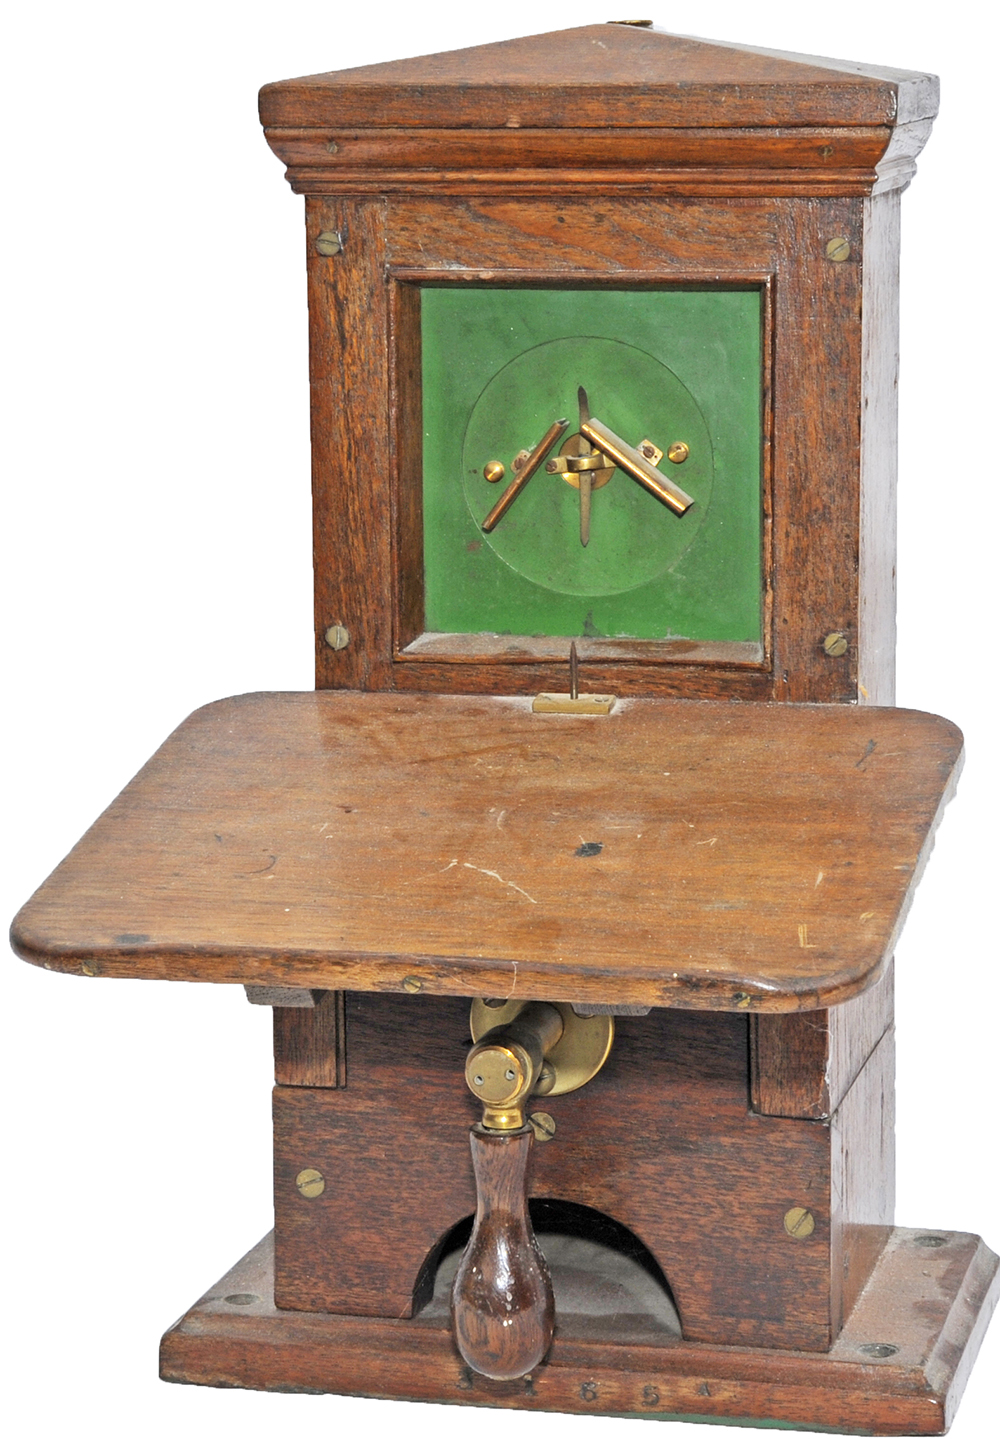 NER mahogany cased Telegraph Instrument with front shelf and handle intact. Simple mechanism working